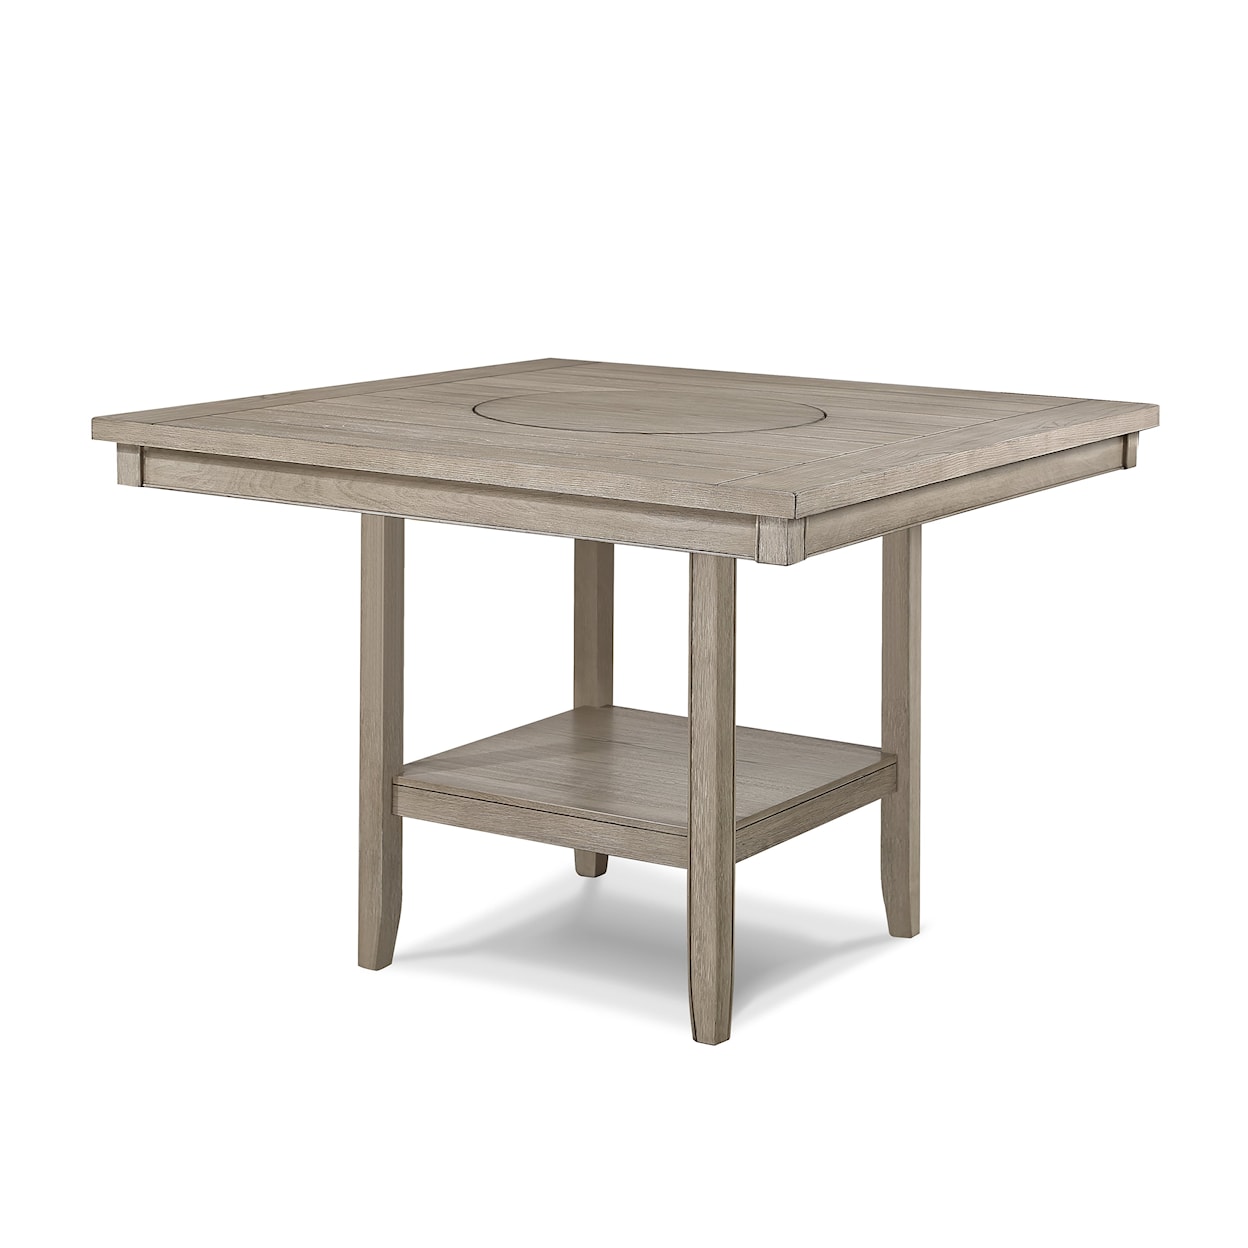 CM Fulton Counter Height Table